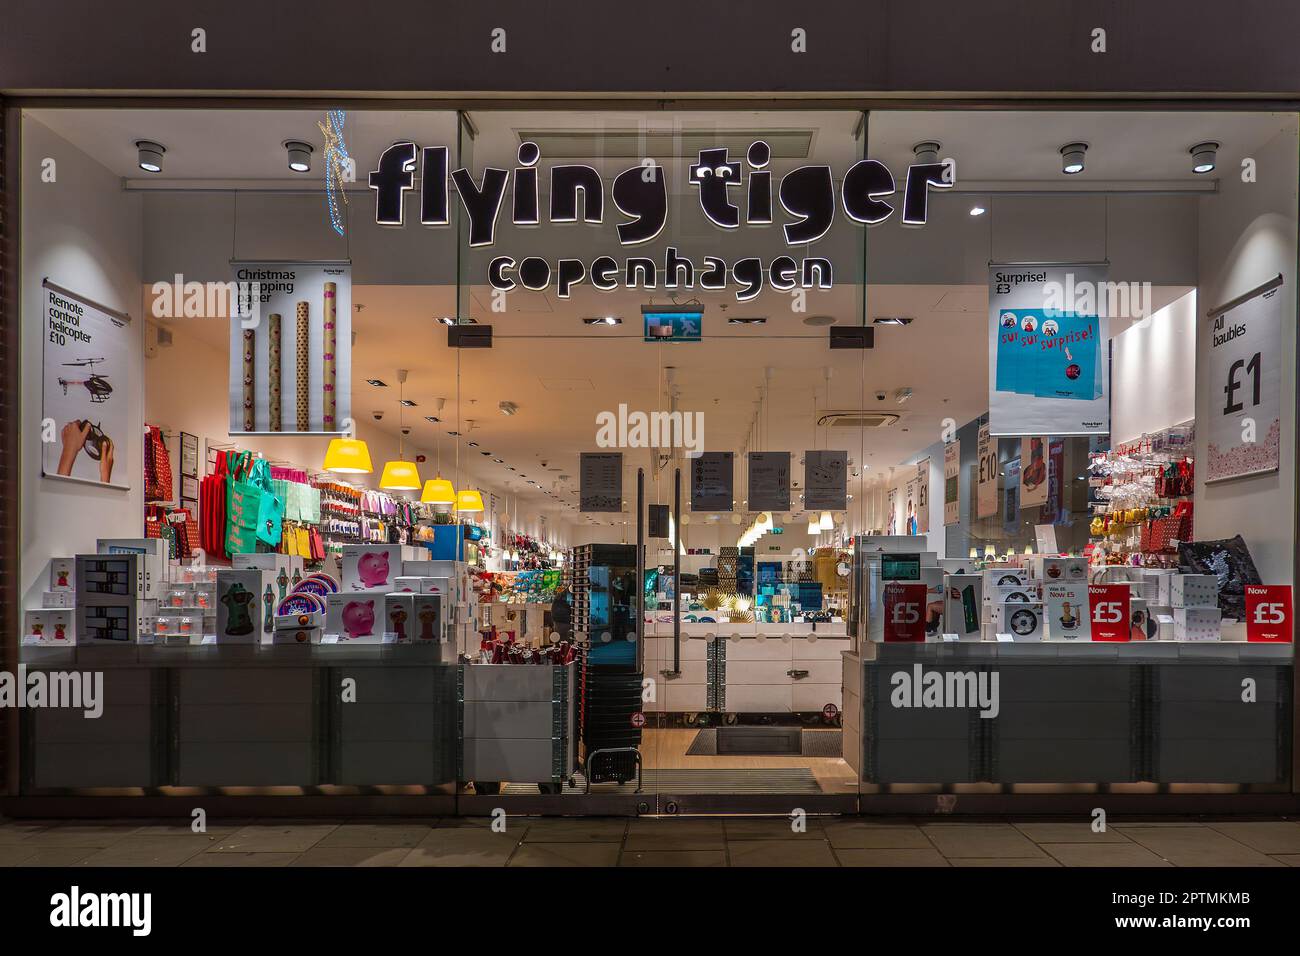 Flying Tiger,Copenhagan,magasin,vitrine,Whitefriars,Centre commercial,Canterbury,Kent,Angleterre Banque D'Images